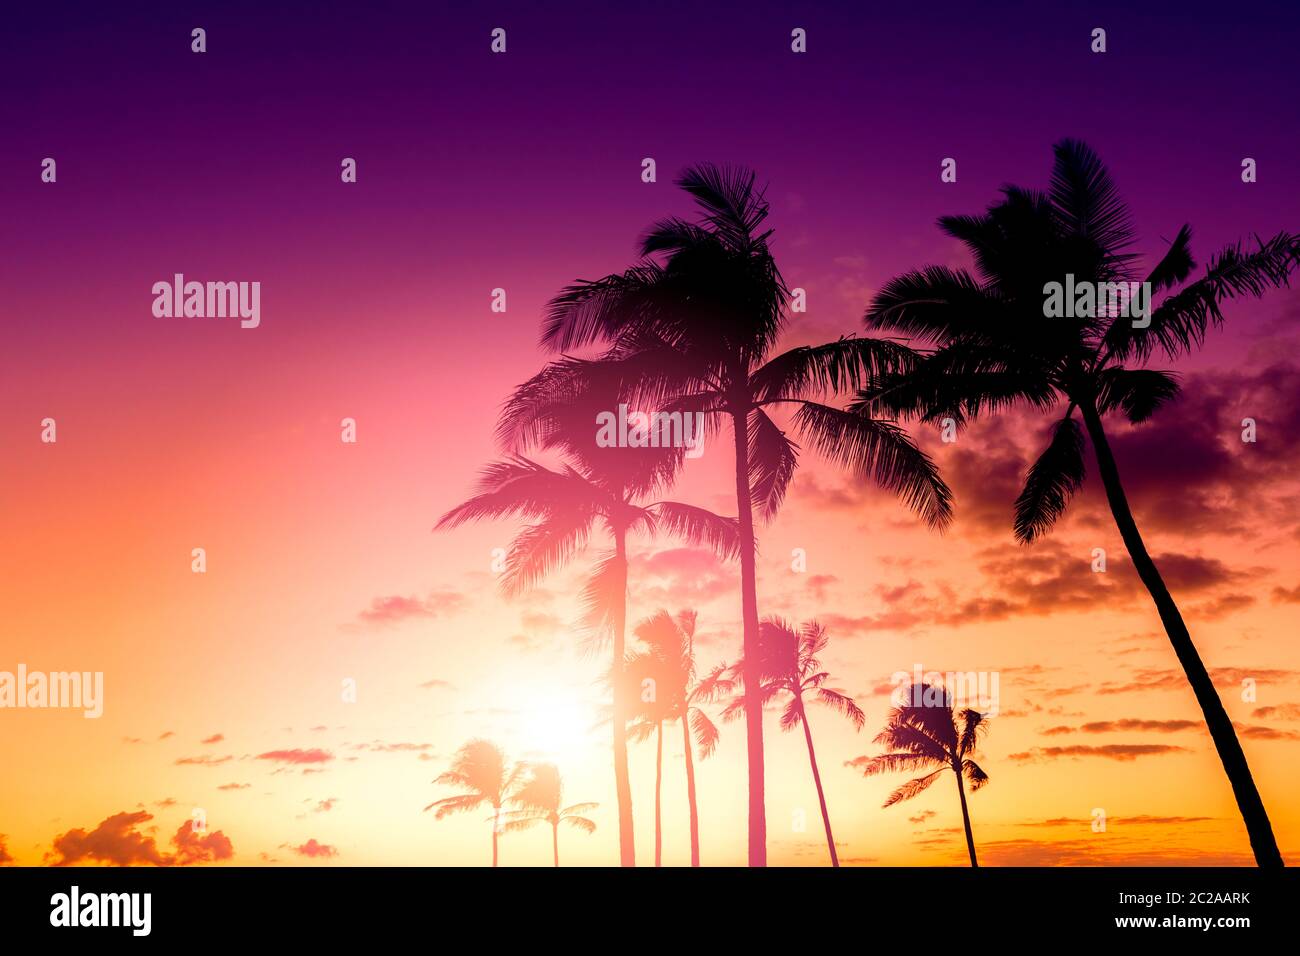 Tropical sunset skt with palm trees Stock Photo